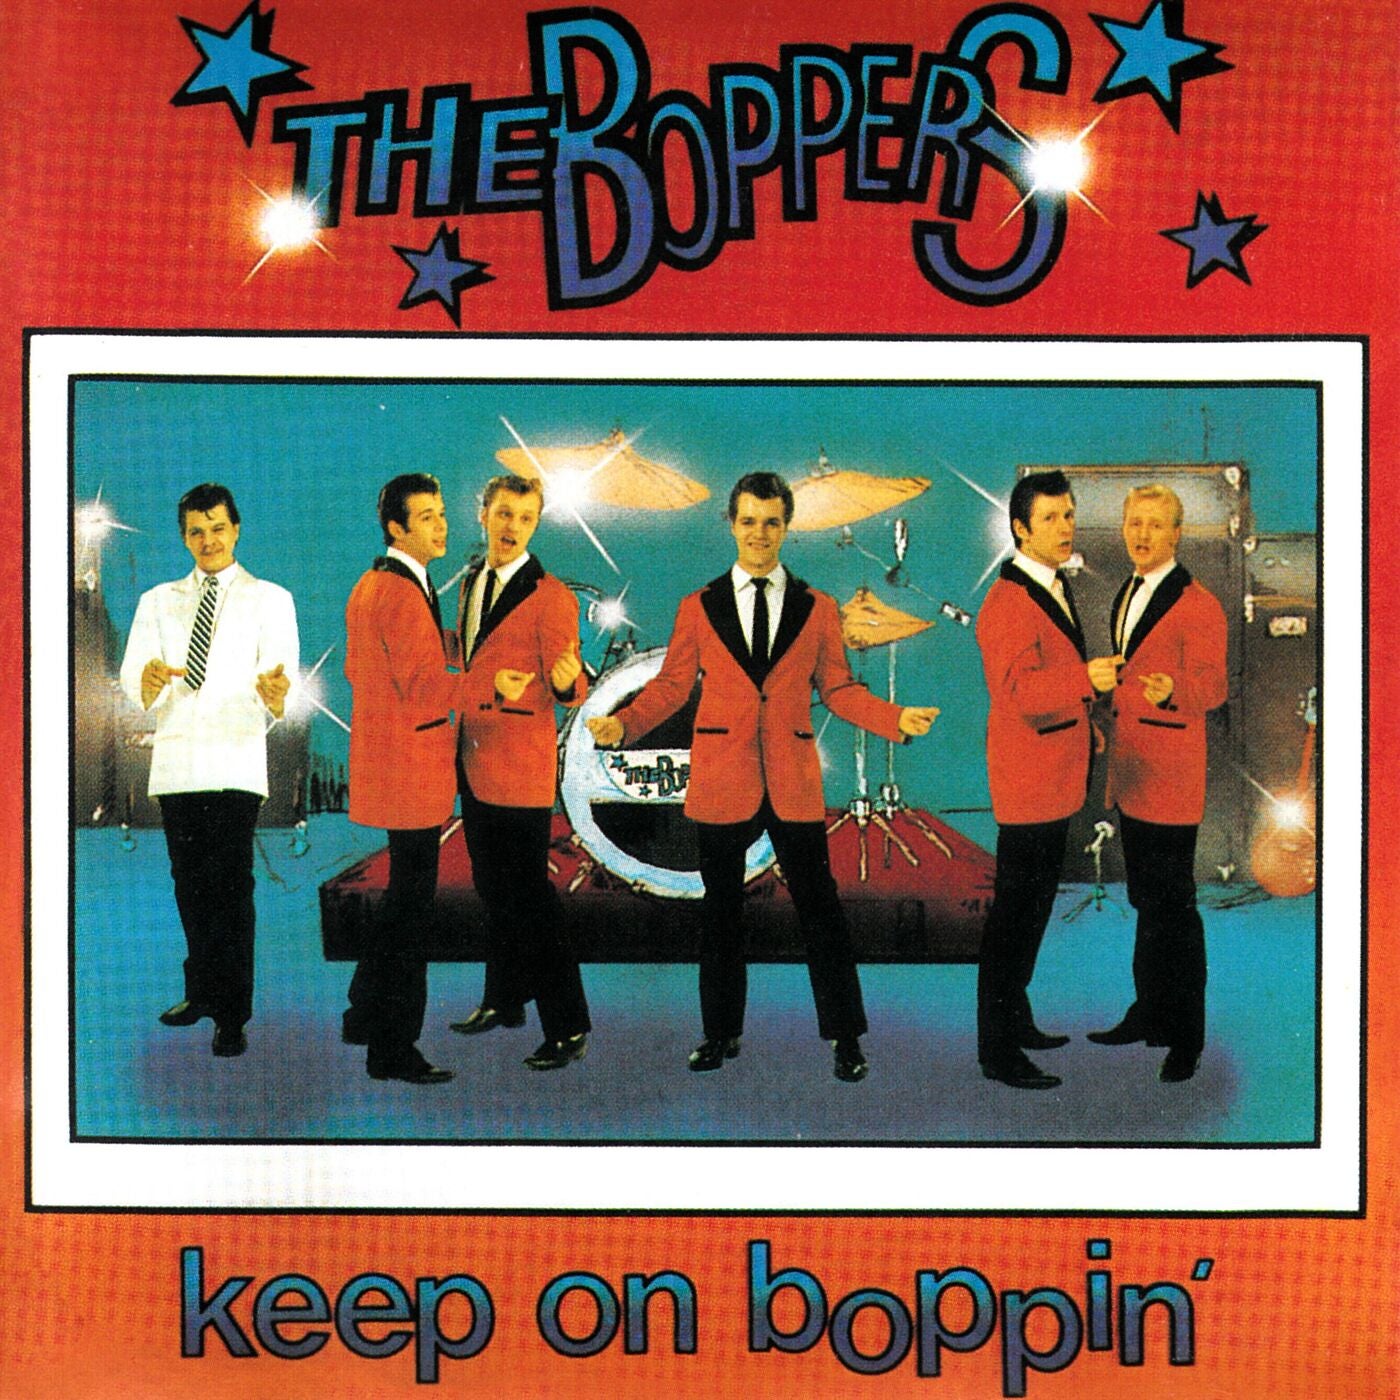 Keep on Boppin' by The Boppers on Beatsource